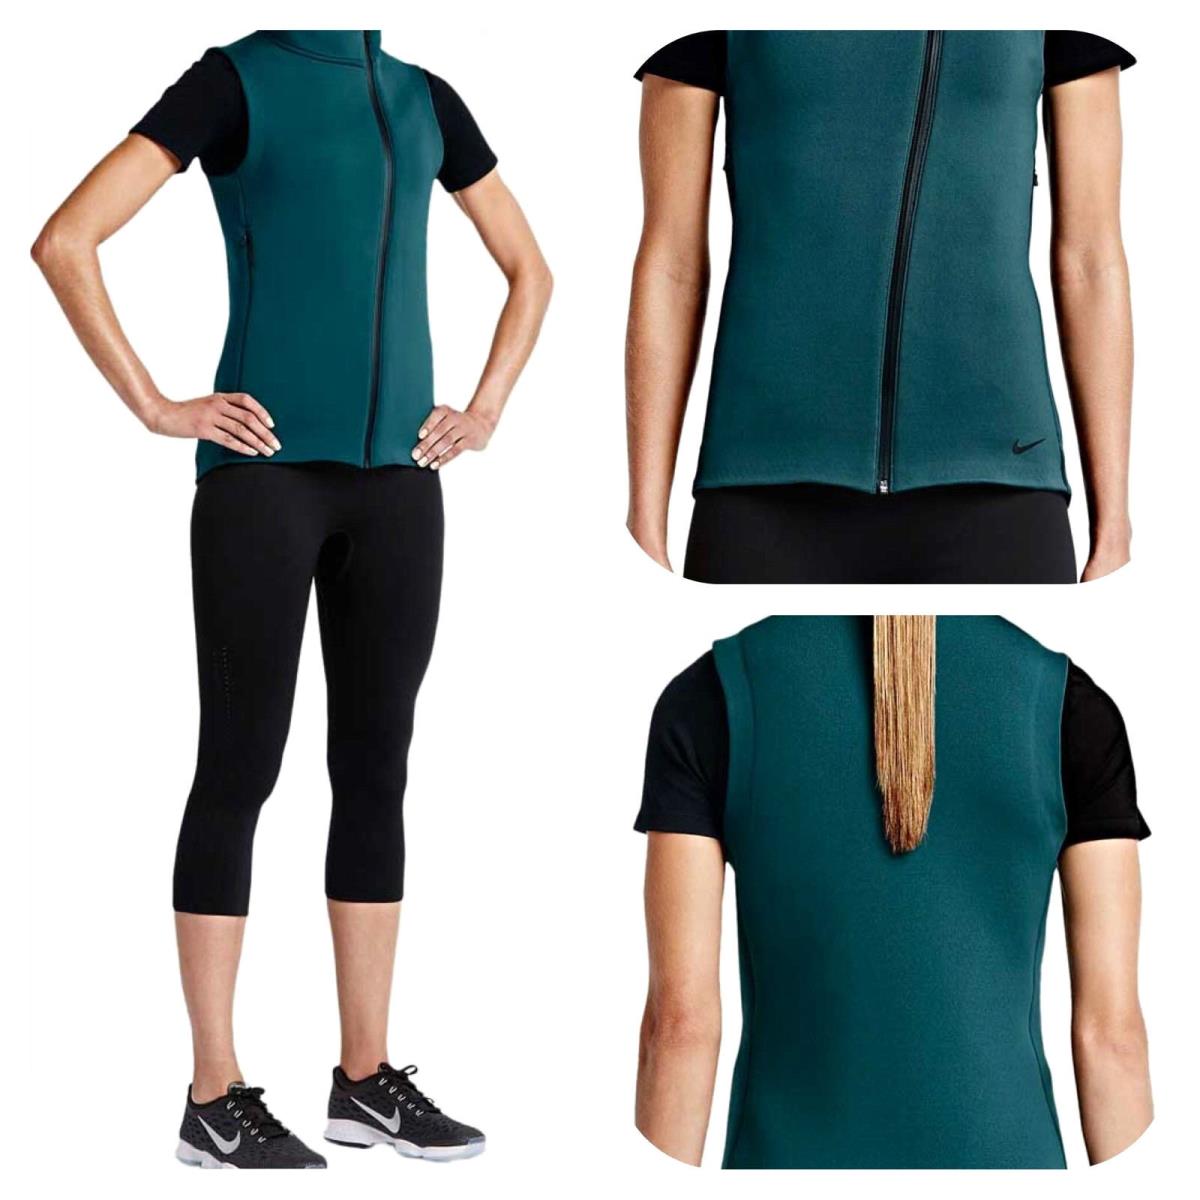 Nike sz S Women`s Therma-sphere Max Training Vest 718910 307 Teal